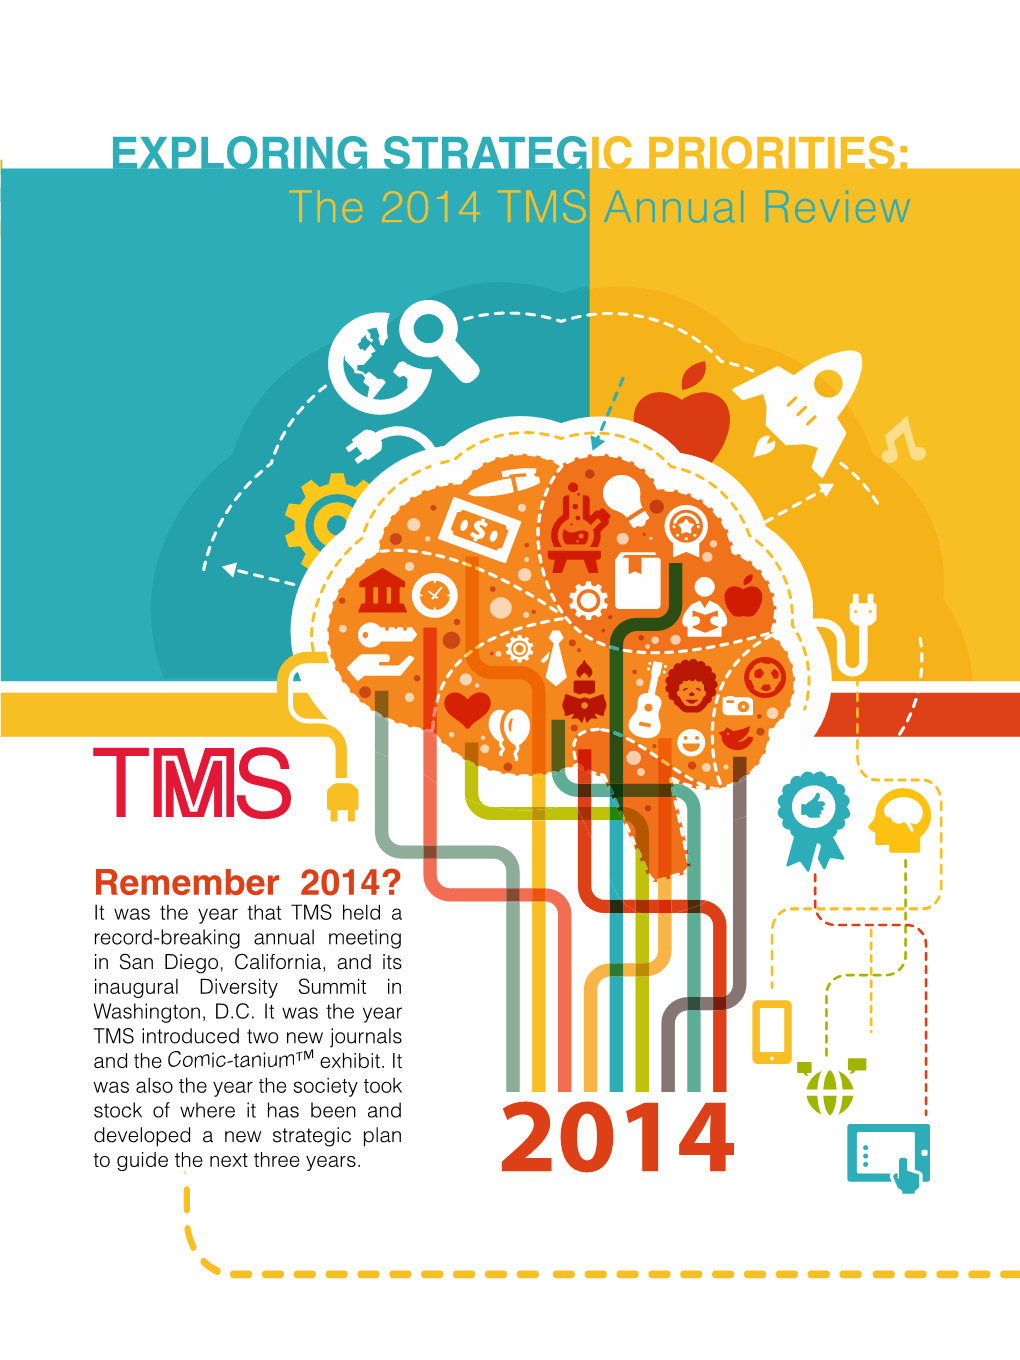 EXPLORING STRATEGIC PRIORITIES: the 2014 TMS Annual Review